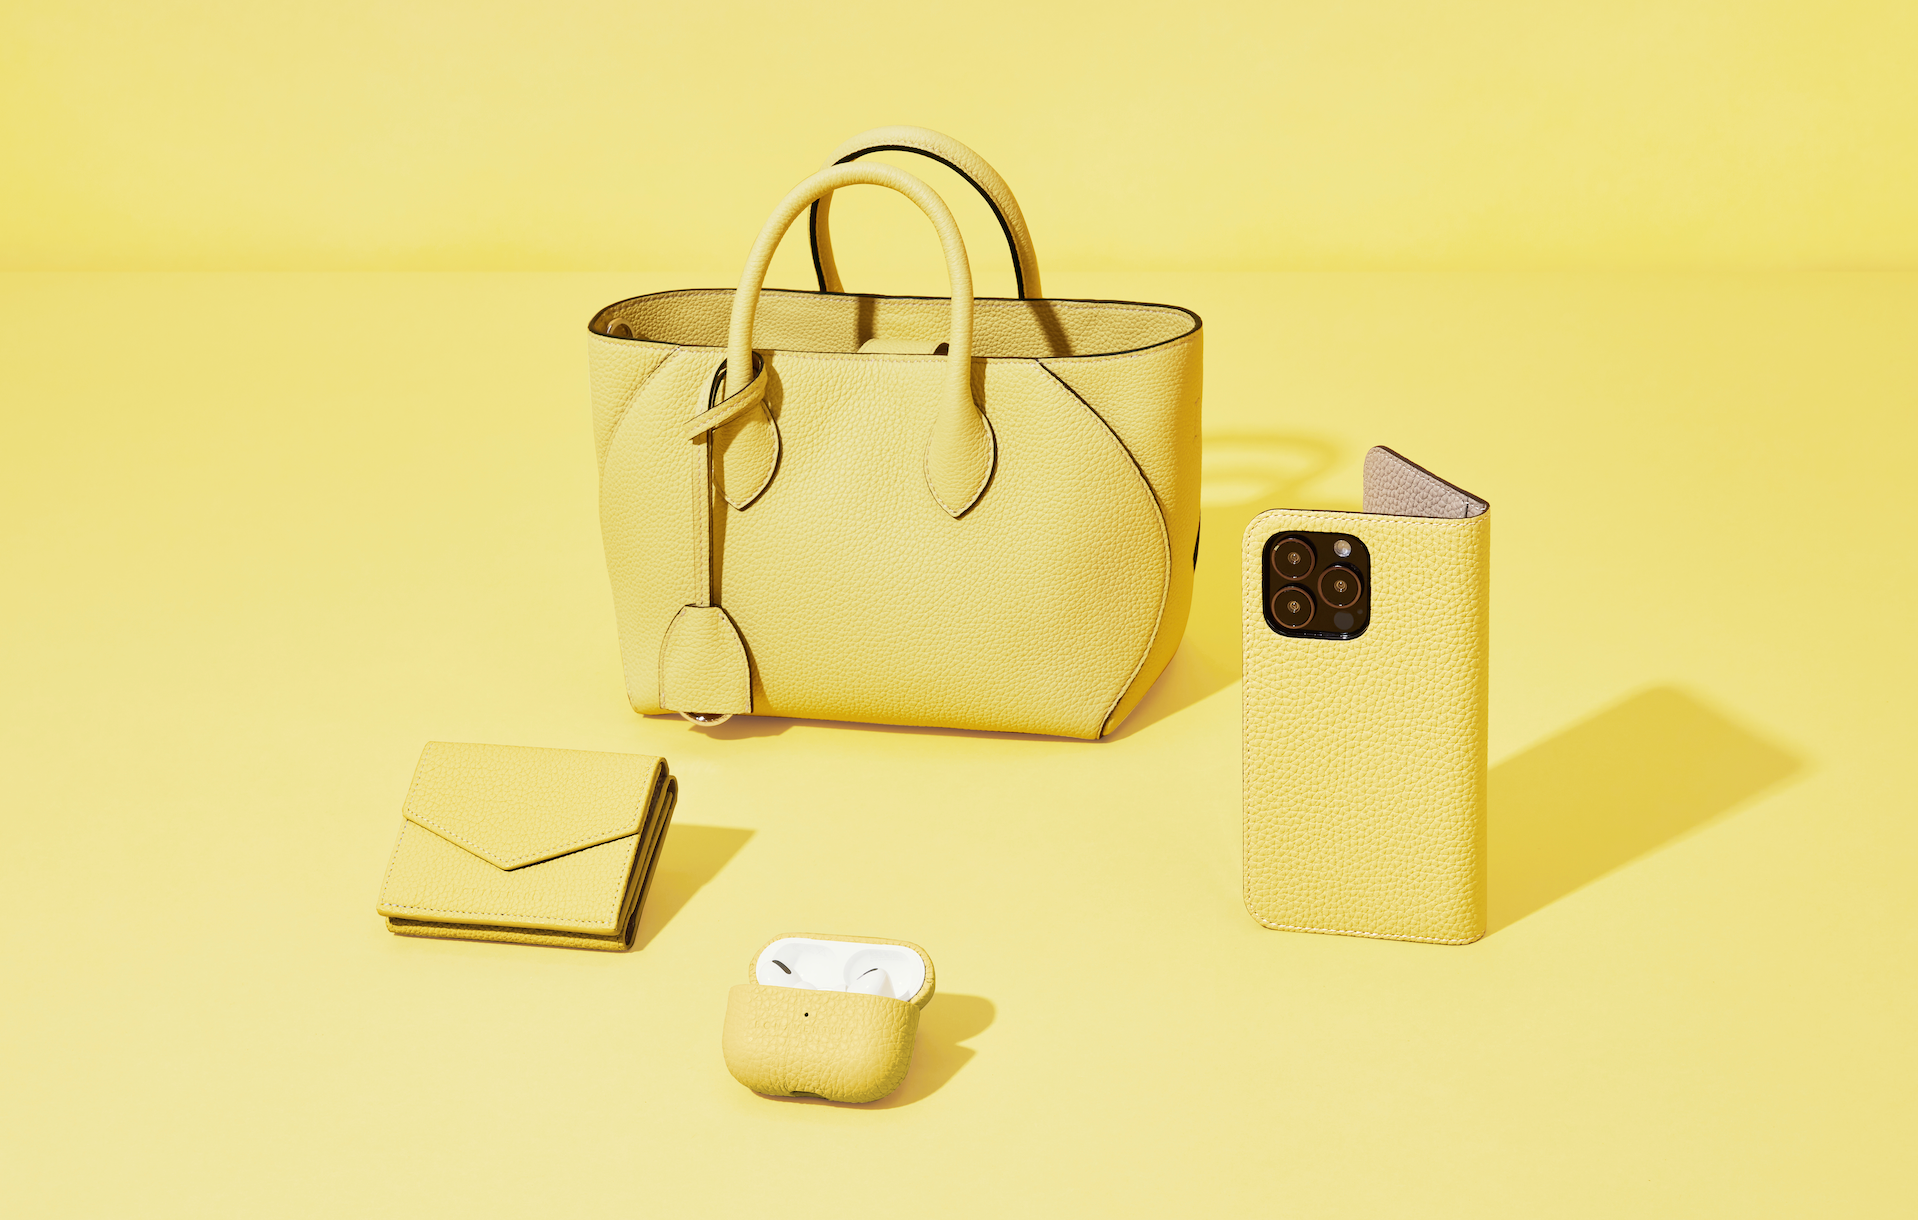 Trendy yellow handbag and matching accessories in yellow by BONAVENTURA for Spring/Summer 2023.